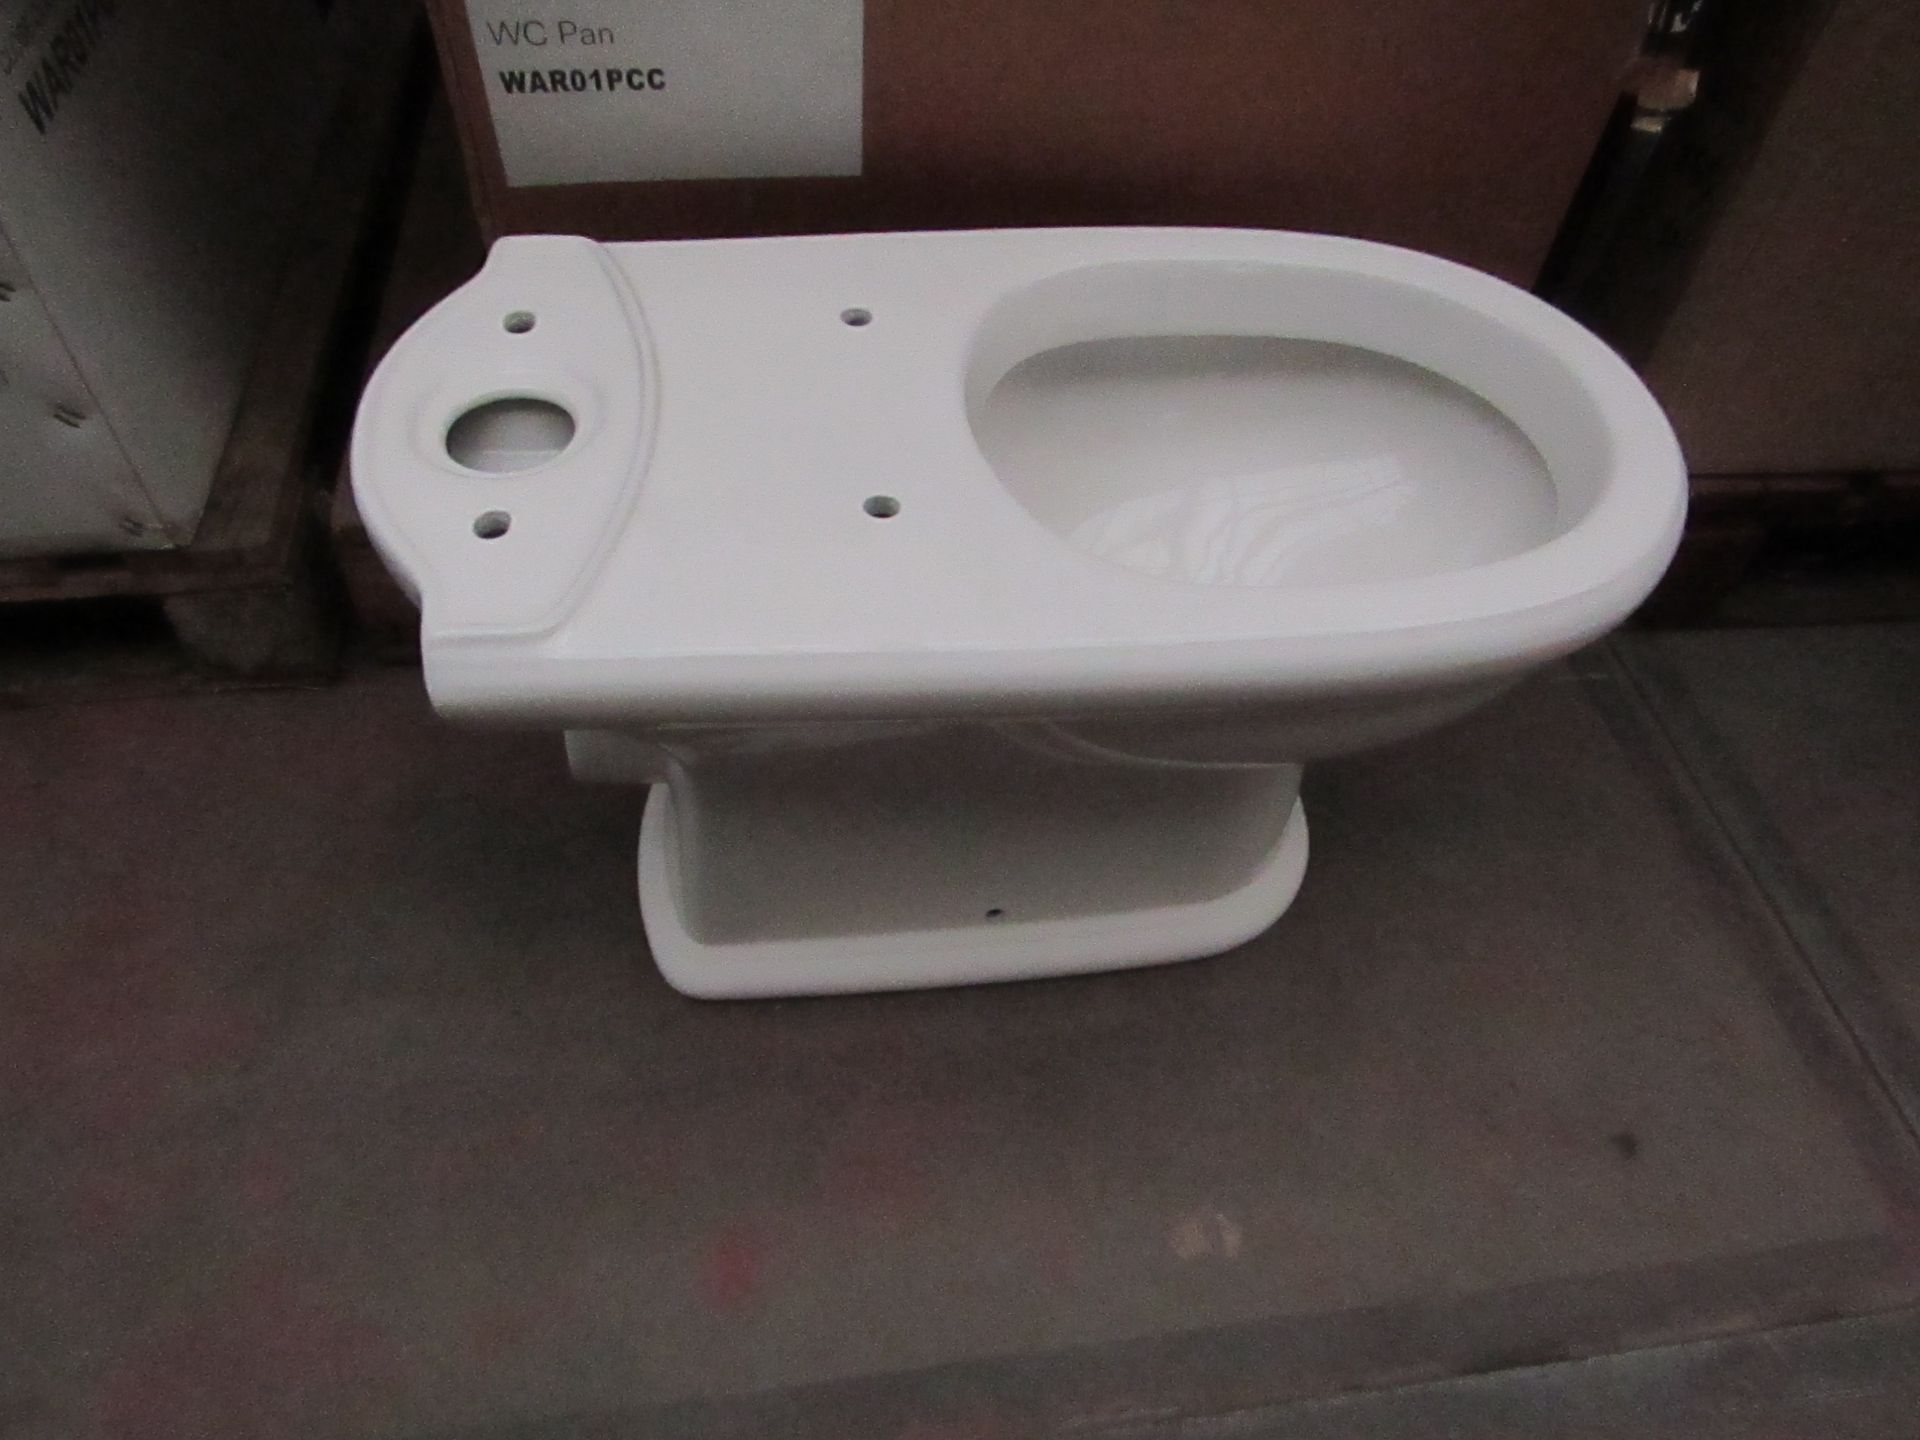 Victoria Plumb WC toilet pan WAR01PCC, new and boxed.